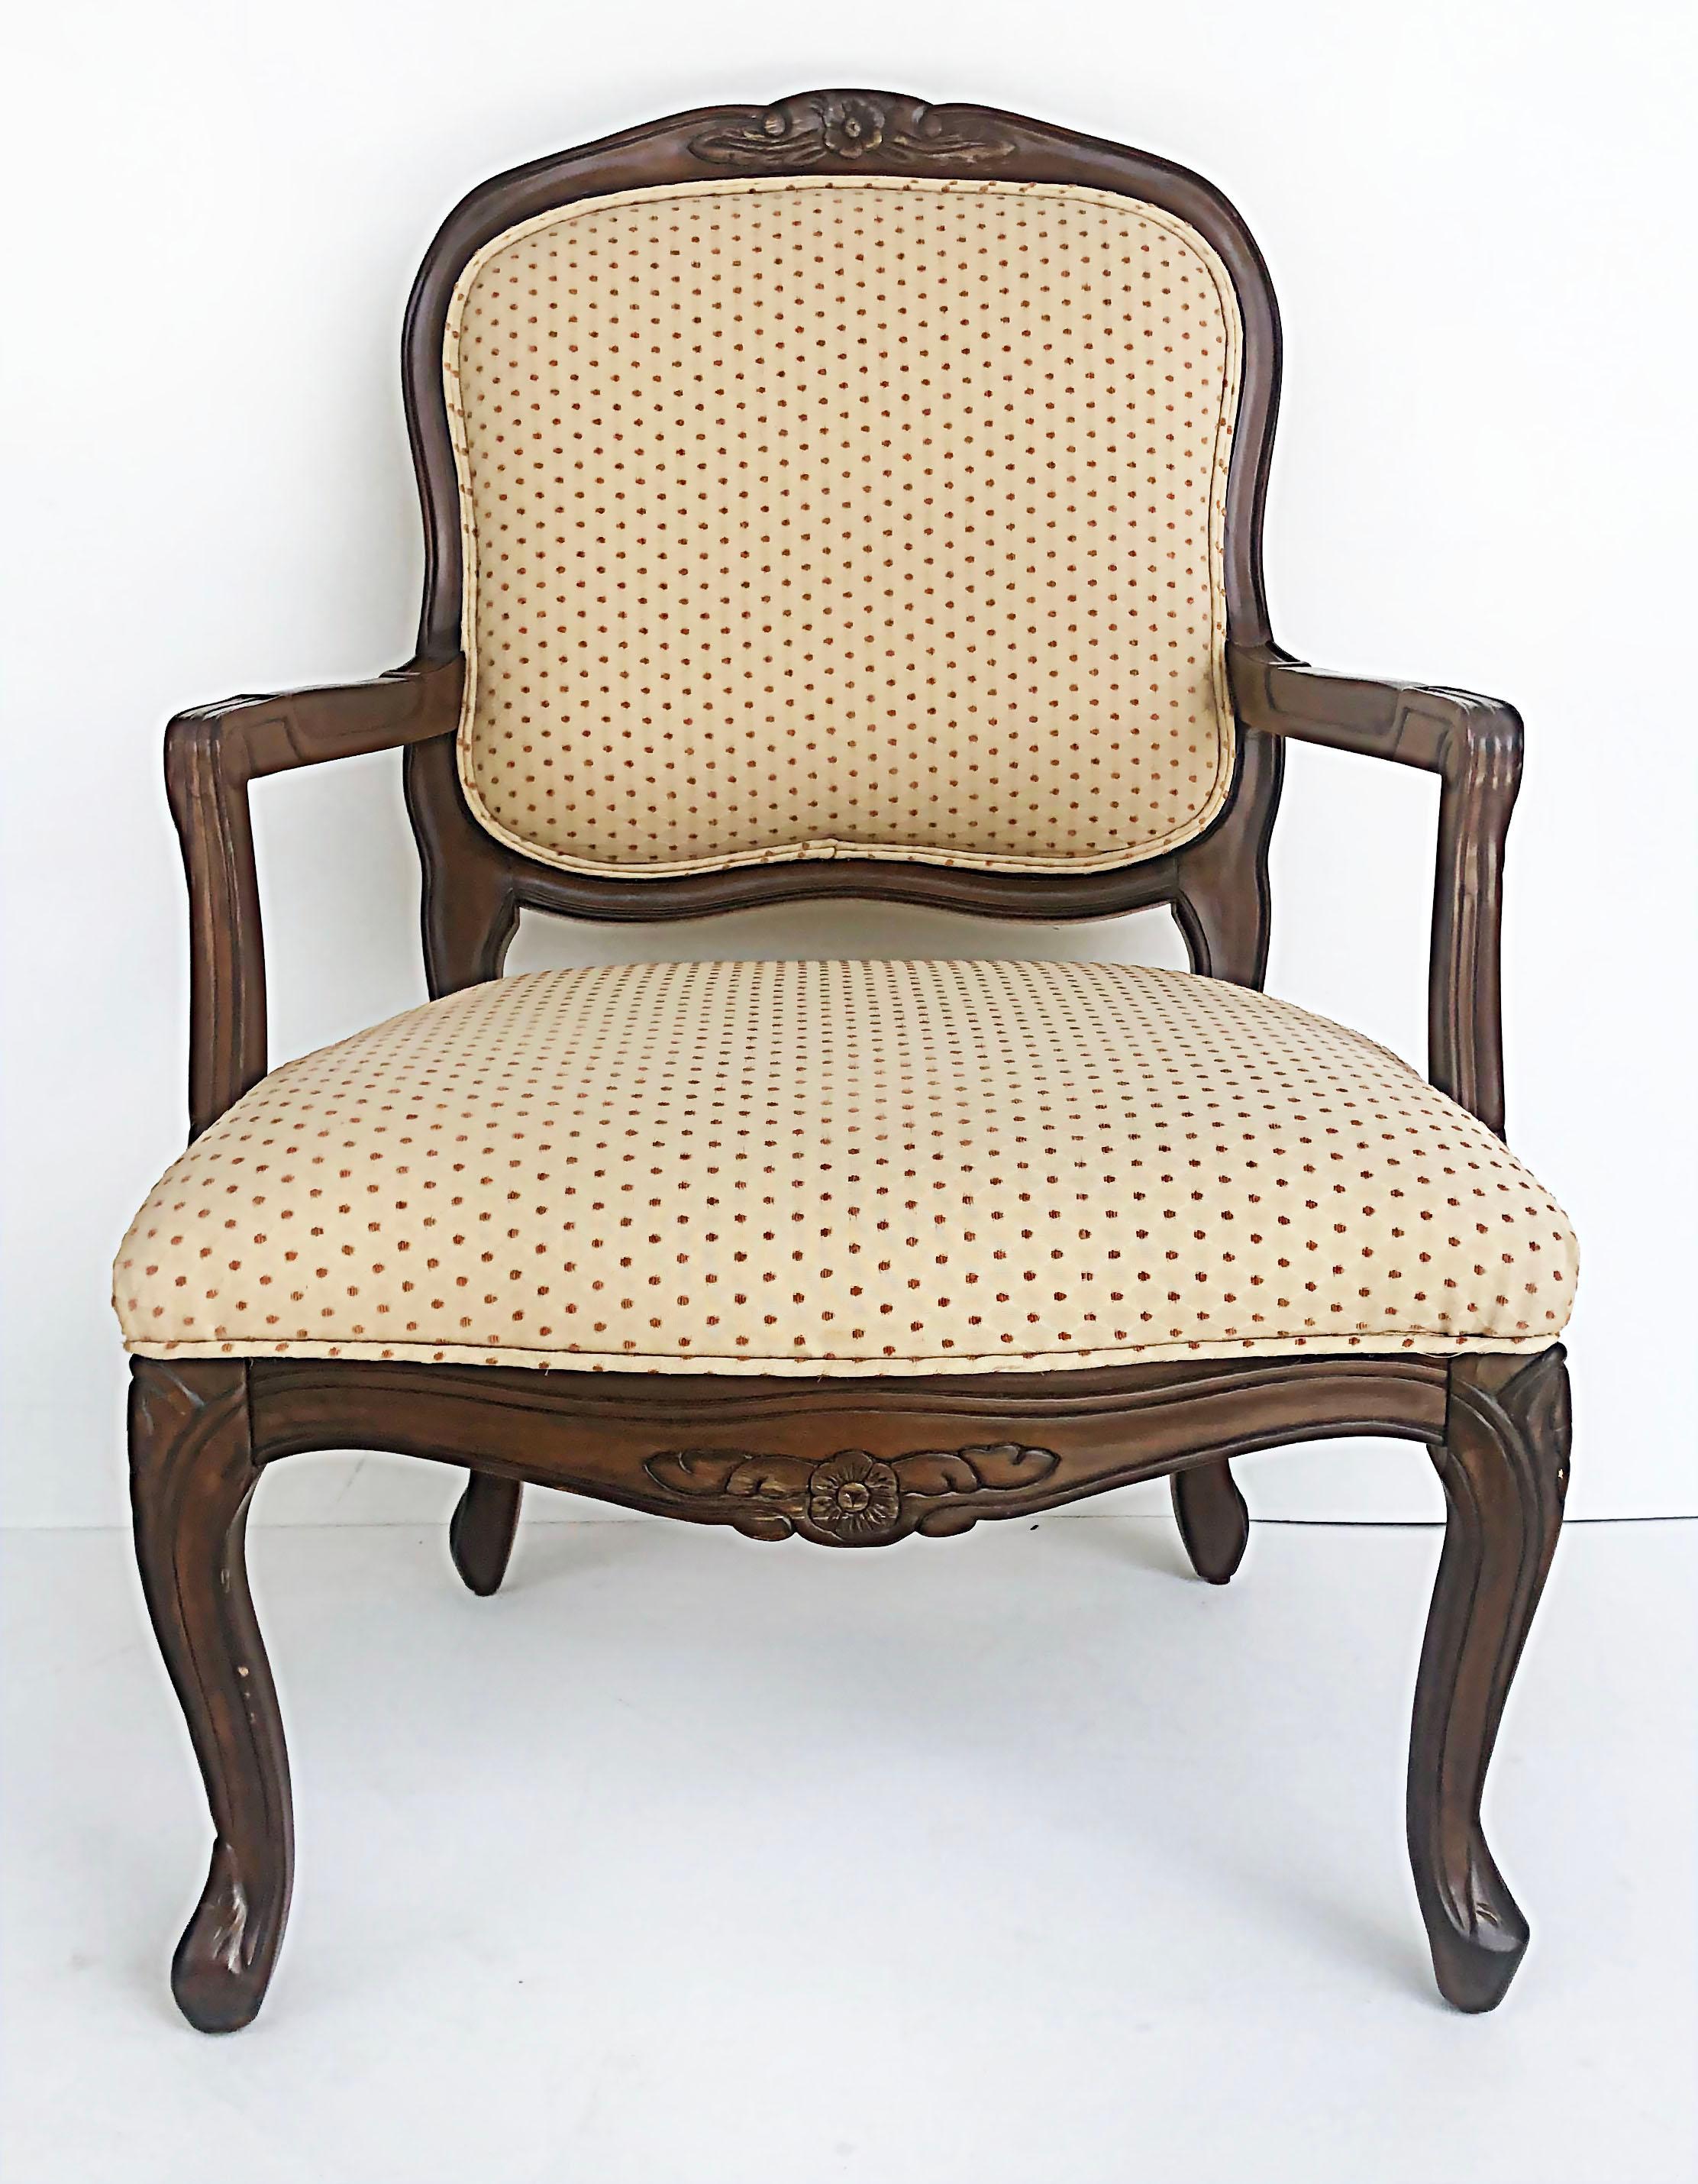 French Provincial Louis XV Style Fauteuils with Cabriole Legs In Good Condition For Sale In Miami, FL